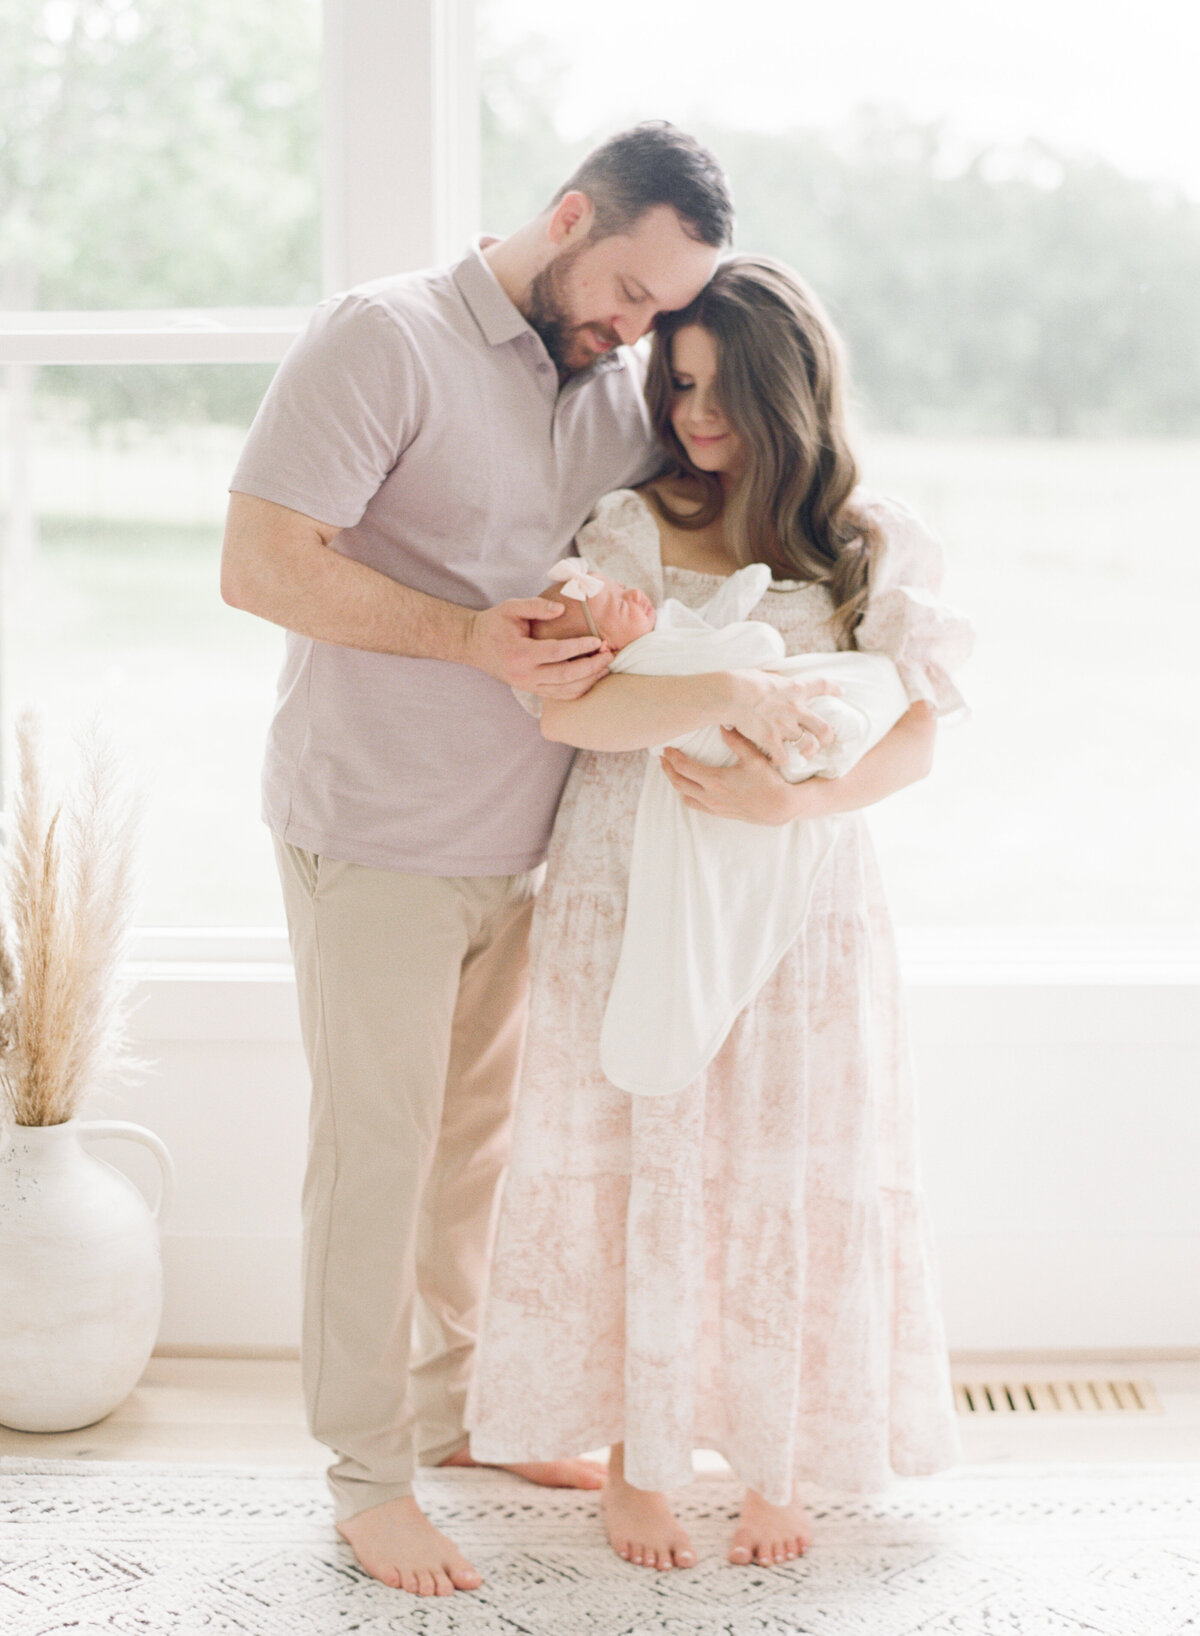 Mom and dad snuggle newborn daughter in front of giant window during the Raleigh newborn photography session. Photographed by Raleigh newborn photographer A.J. Dunlap Photography.